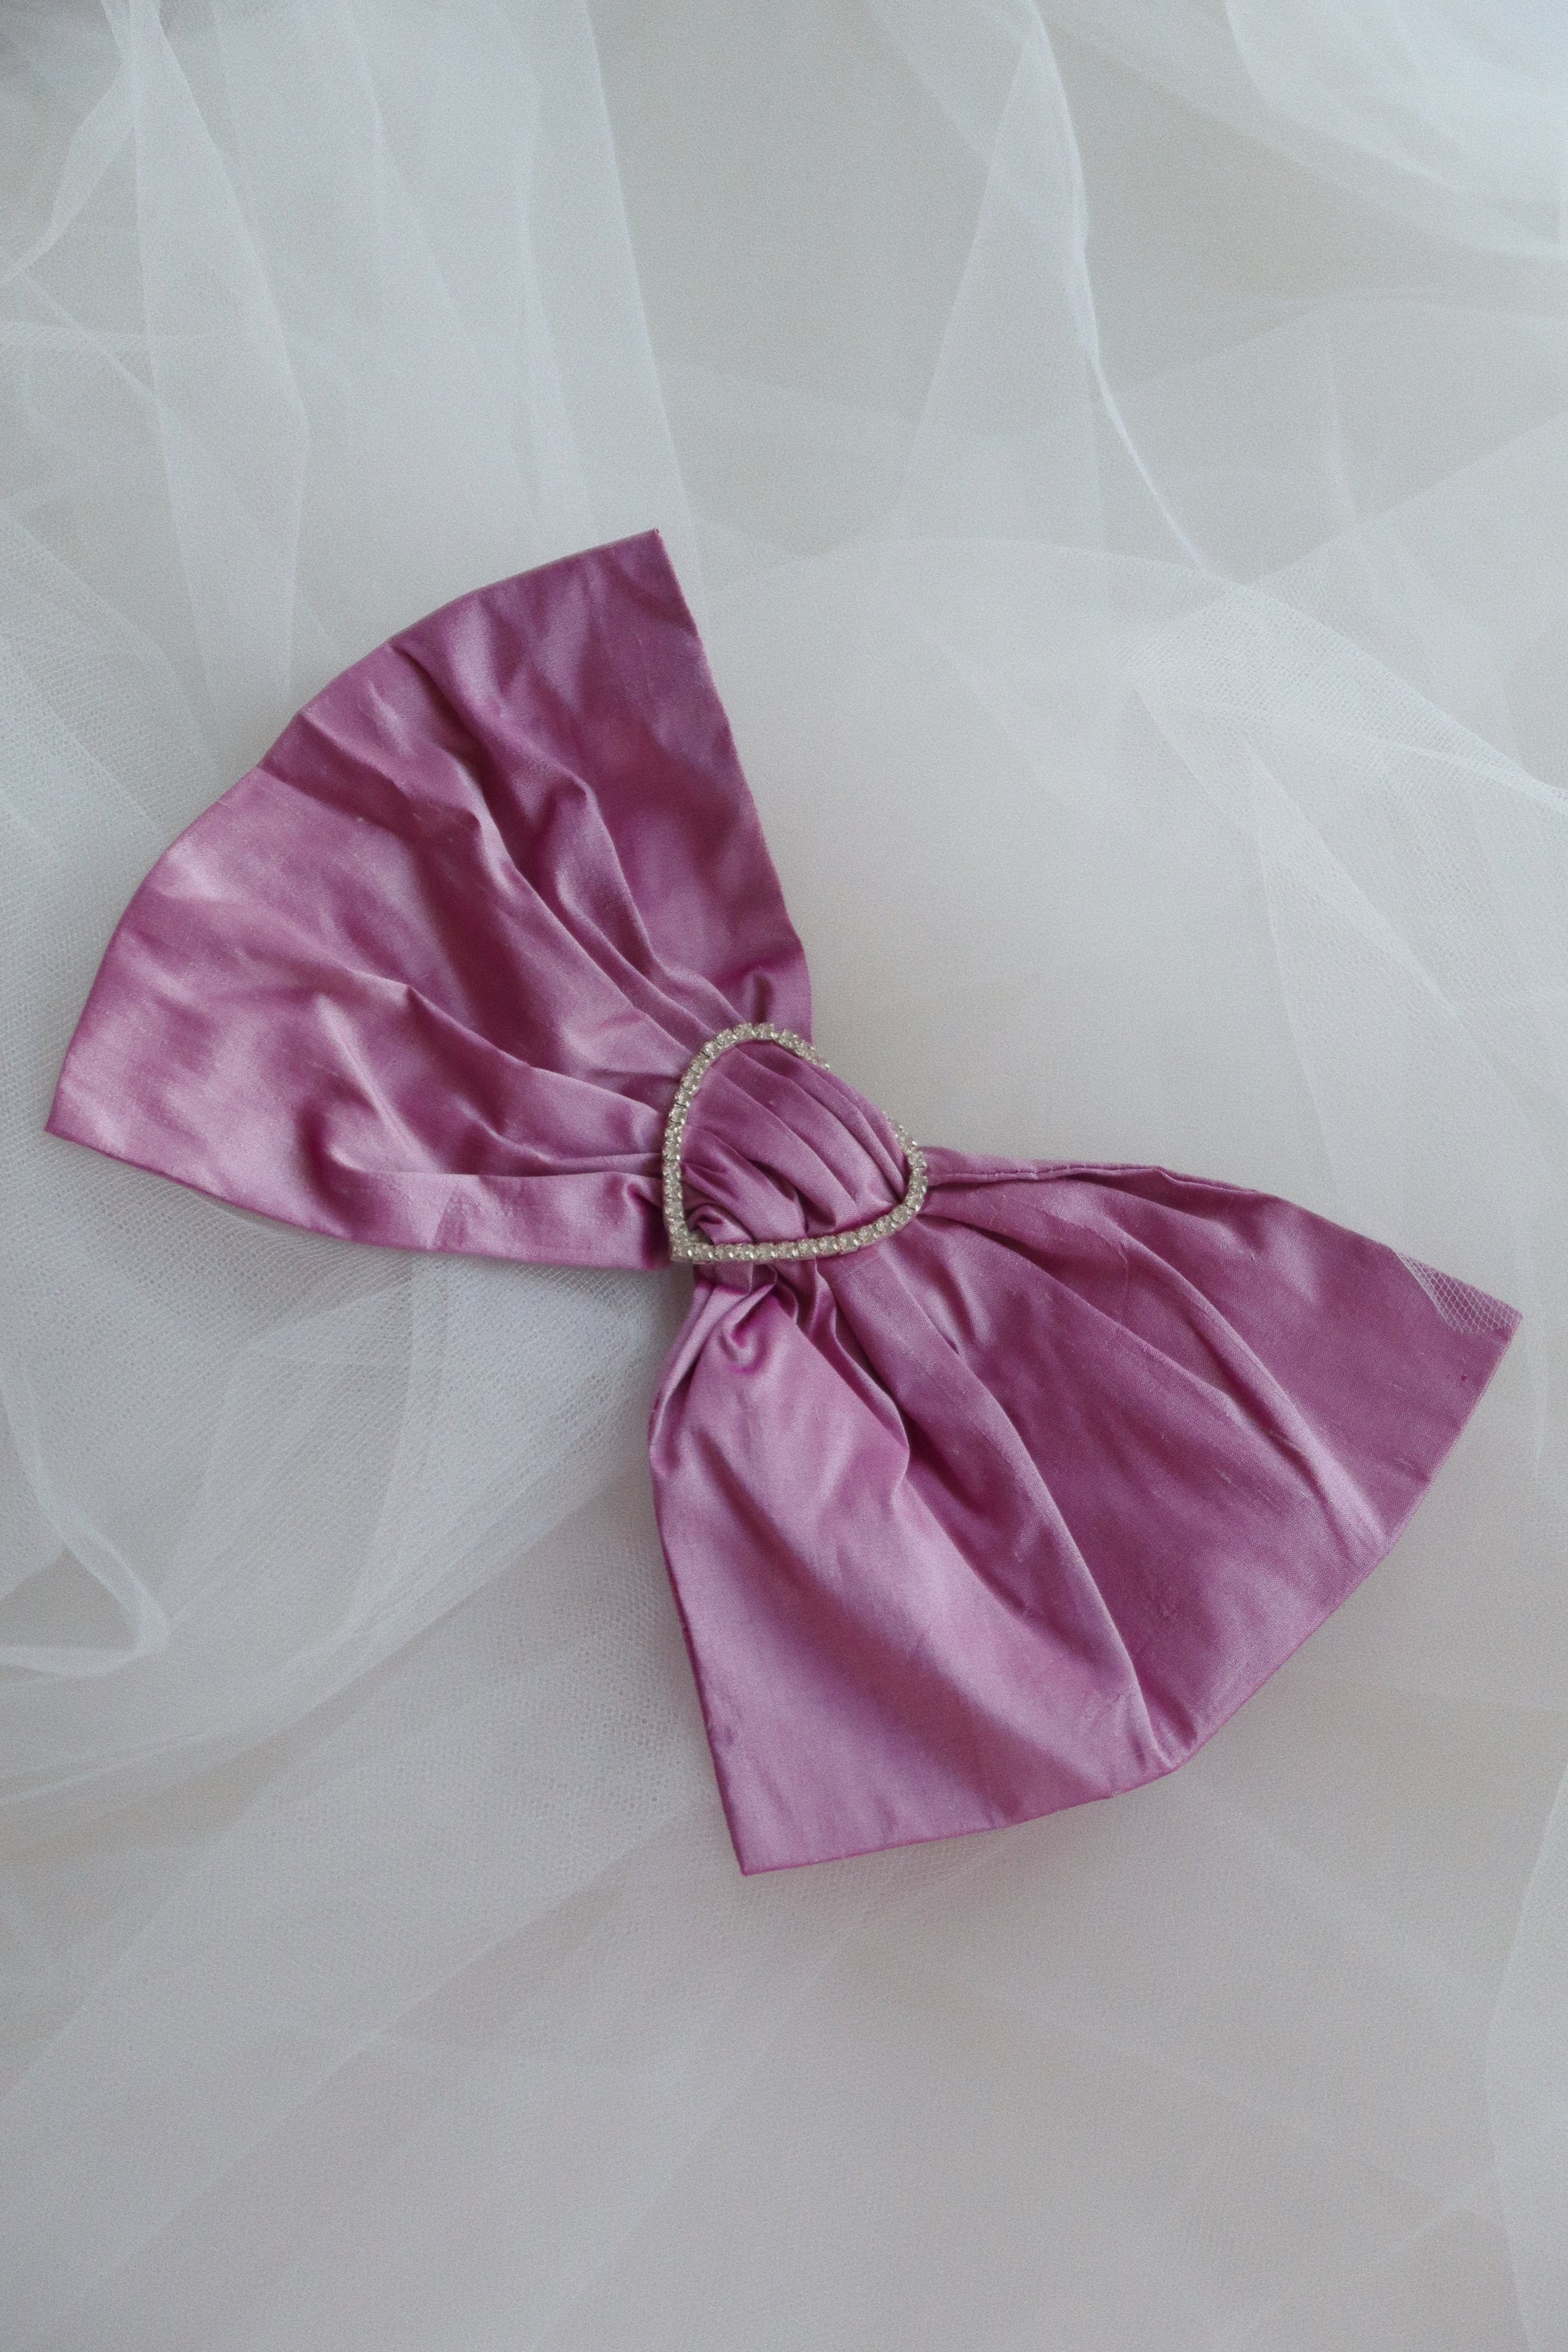 Merrfer Large Pink Bow Hair Clip 